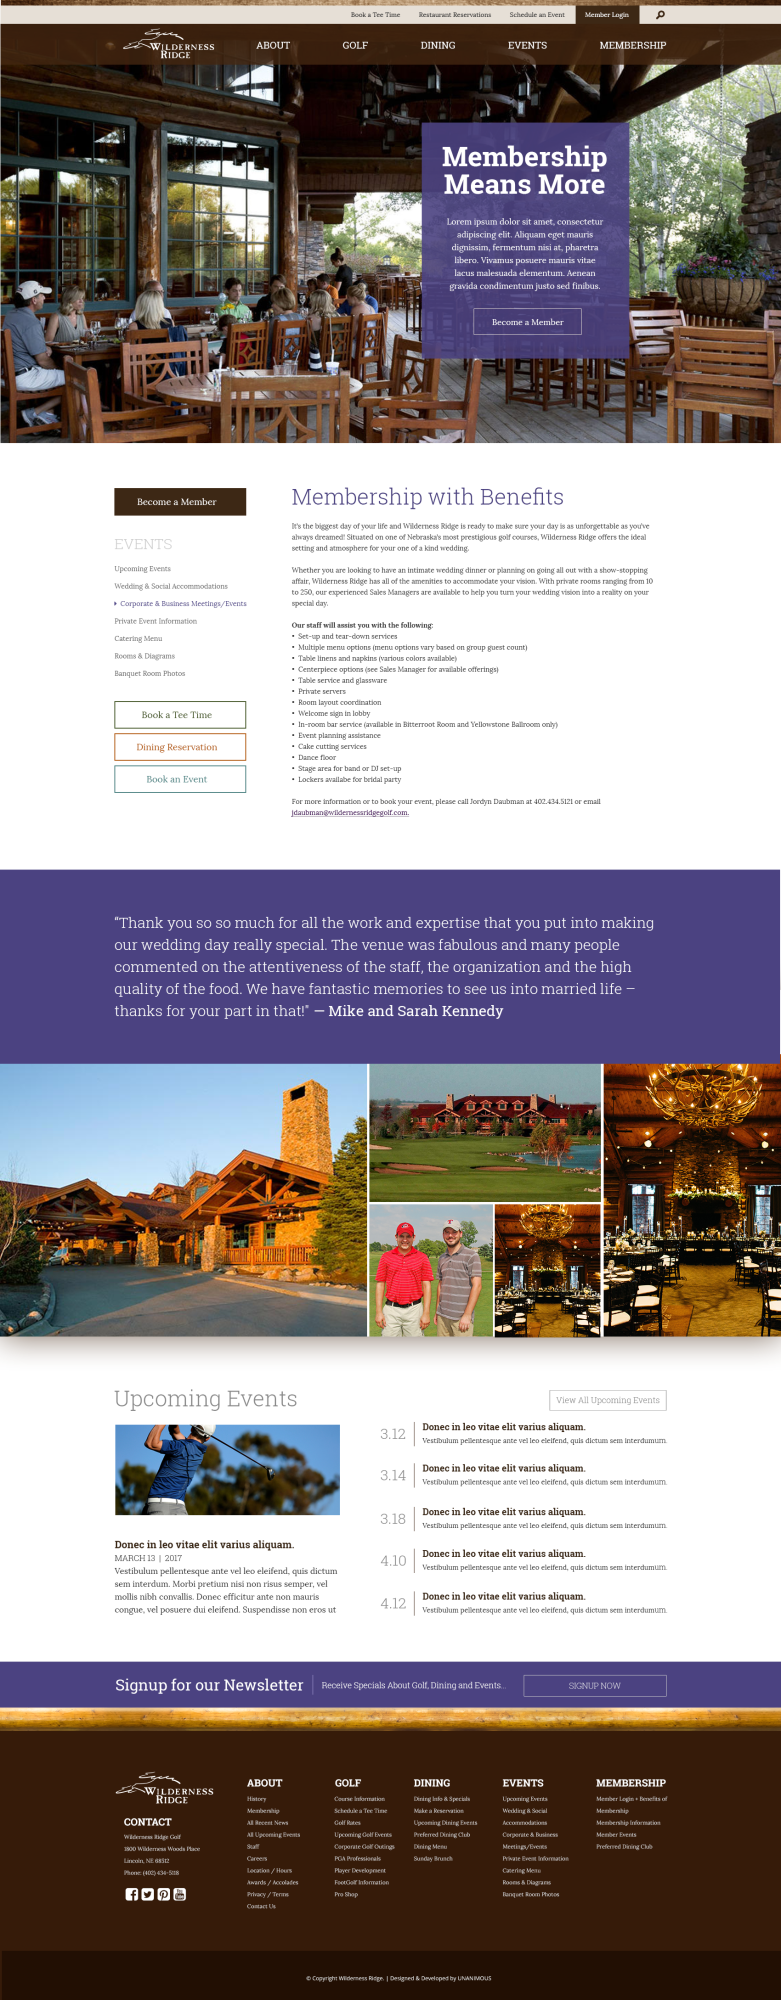 country club website design membership page